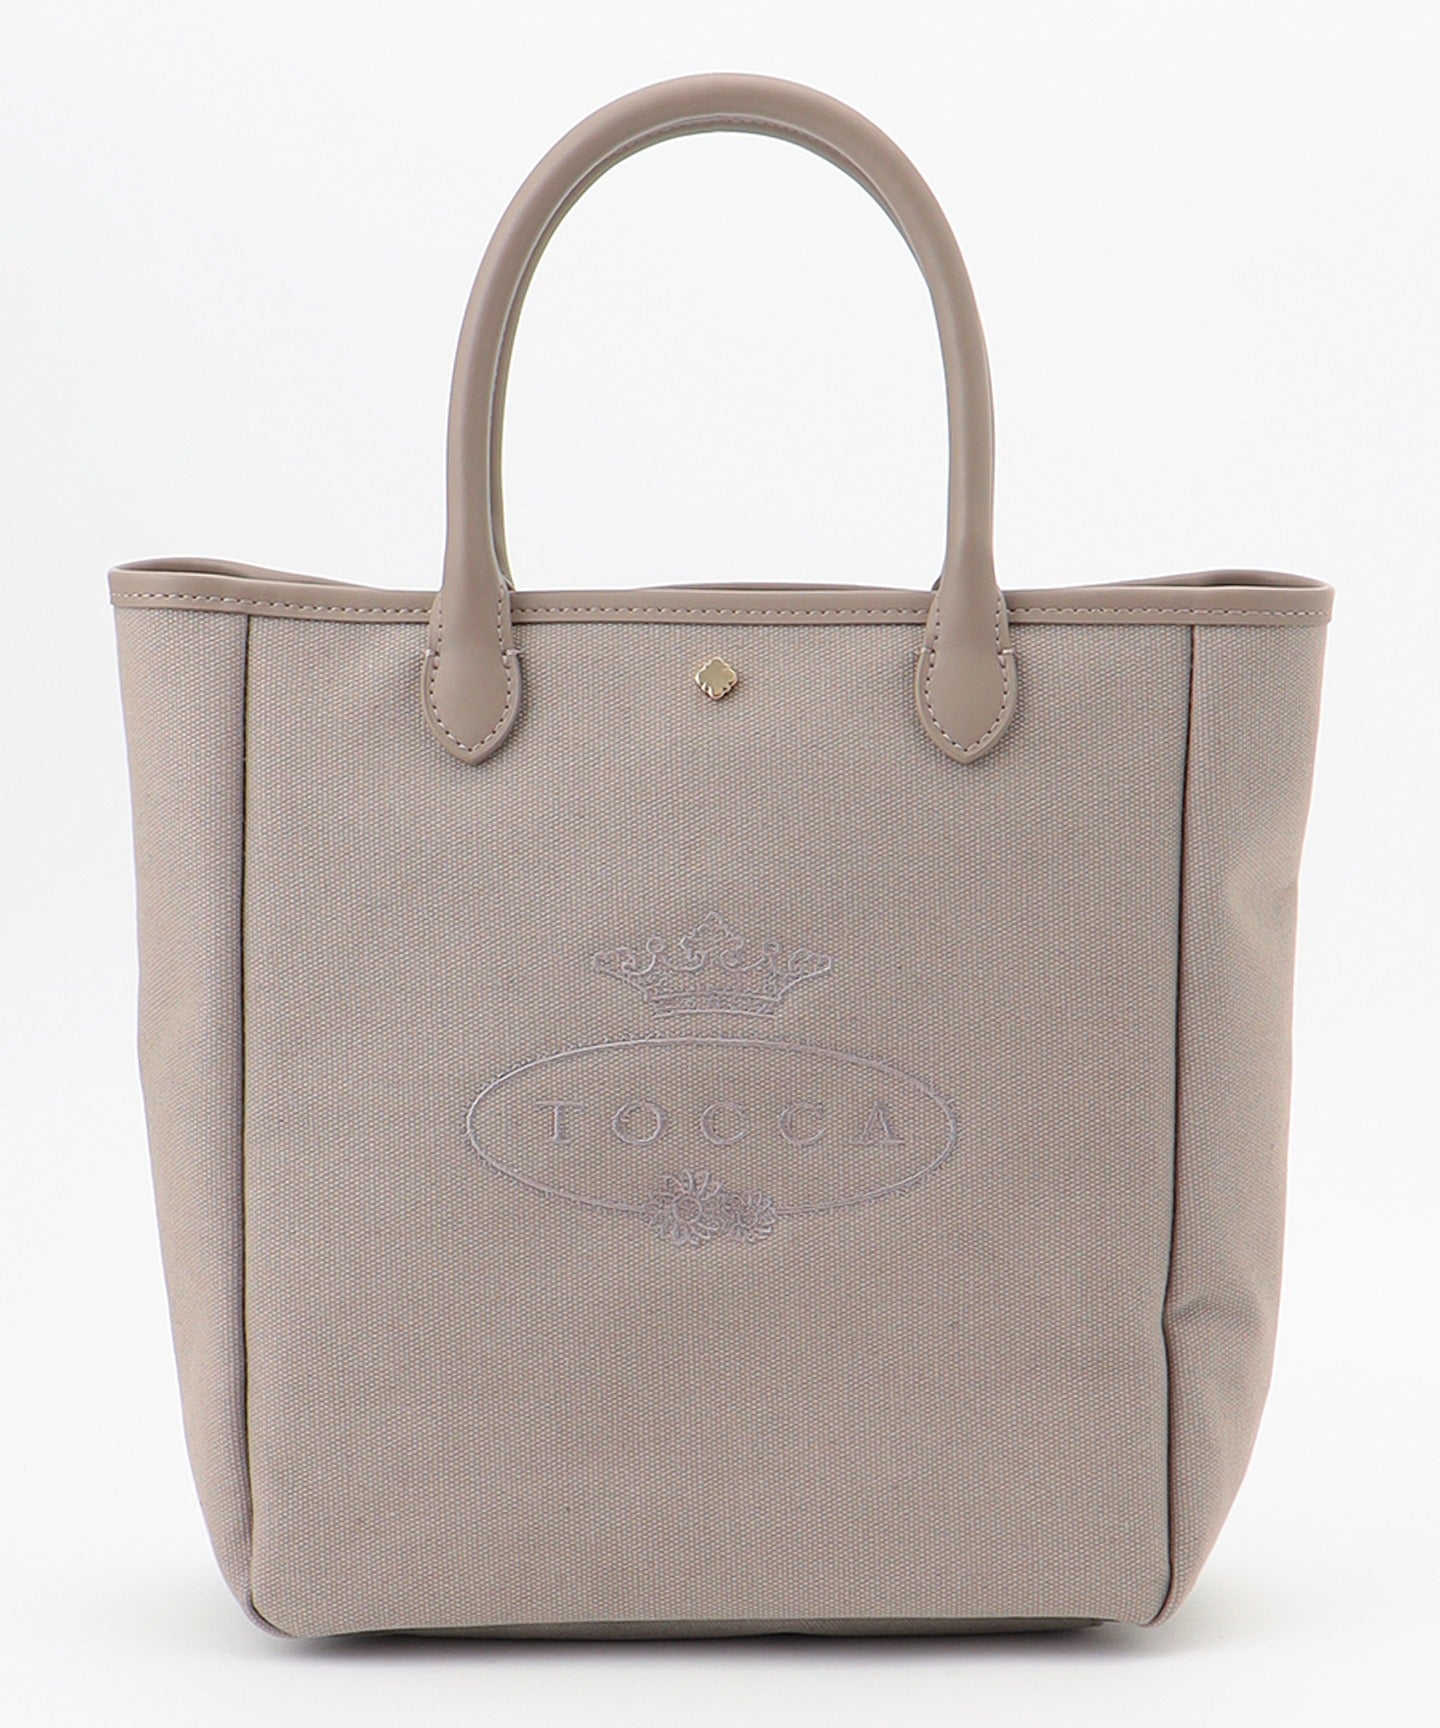 WEB・SOME STORES LIMITED】CRESTA CANVASBAG M – TOCCA OFFICIAL SITE